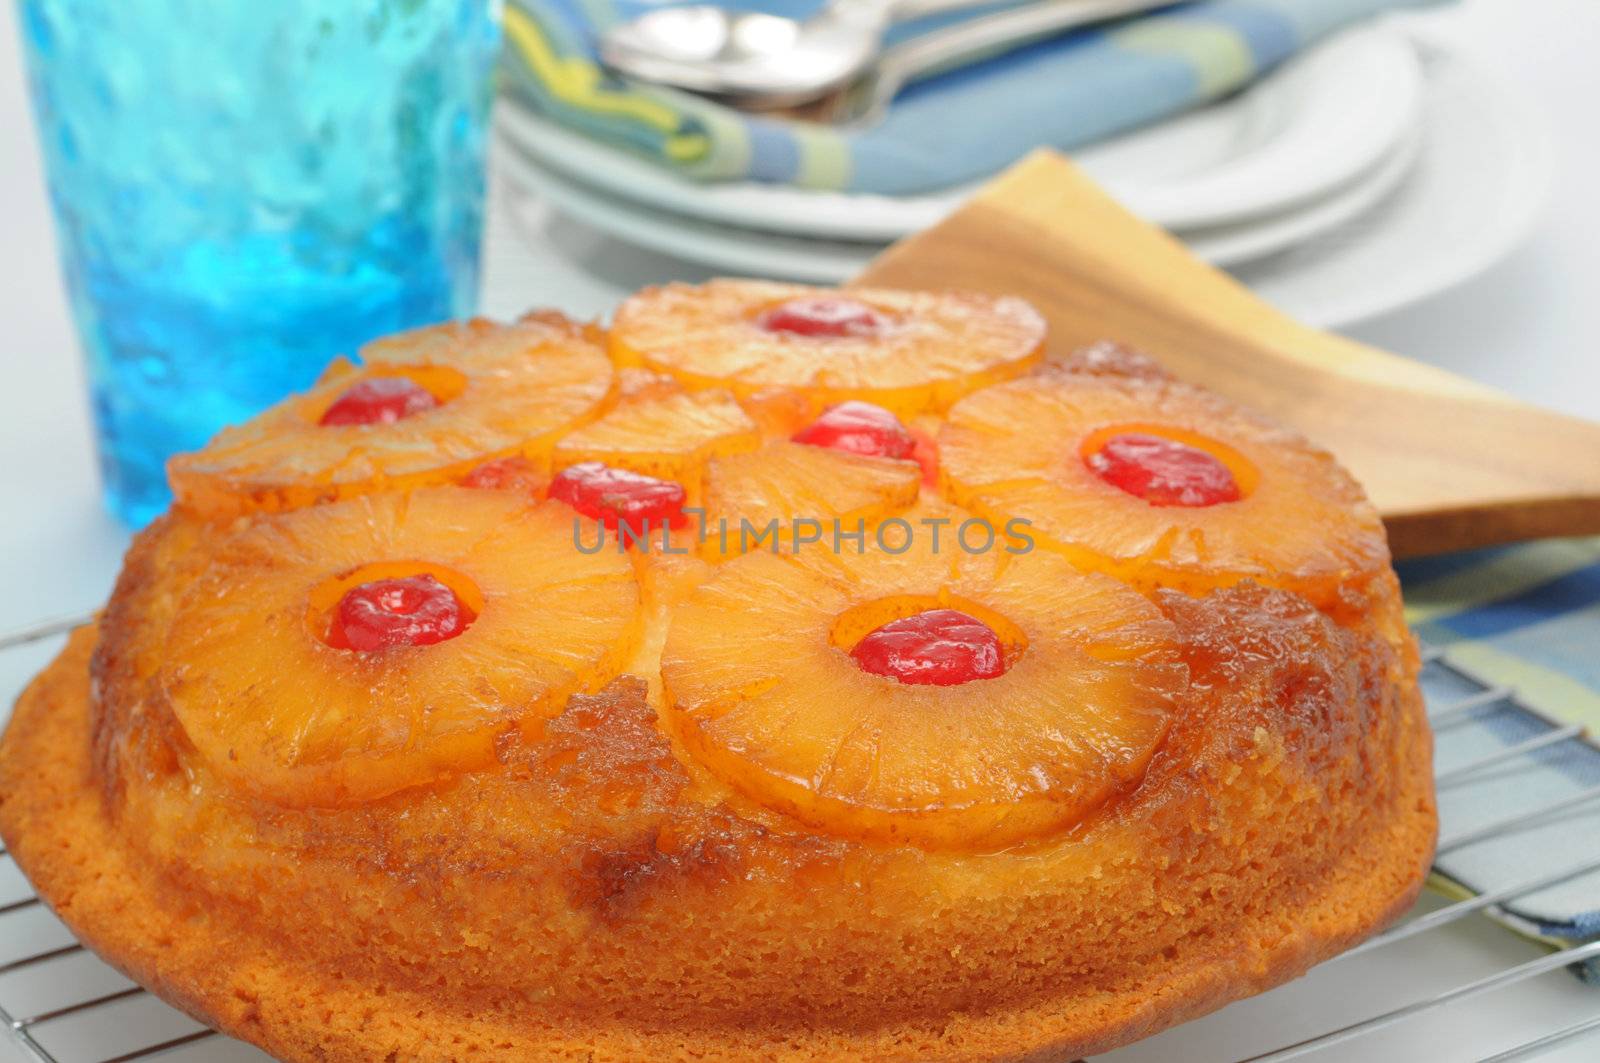 Pineapple Cake by billberryphotography